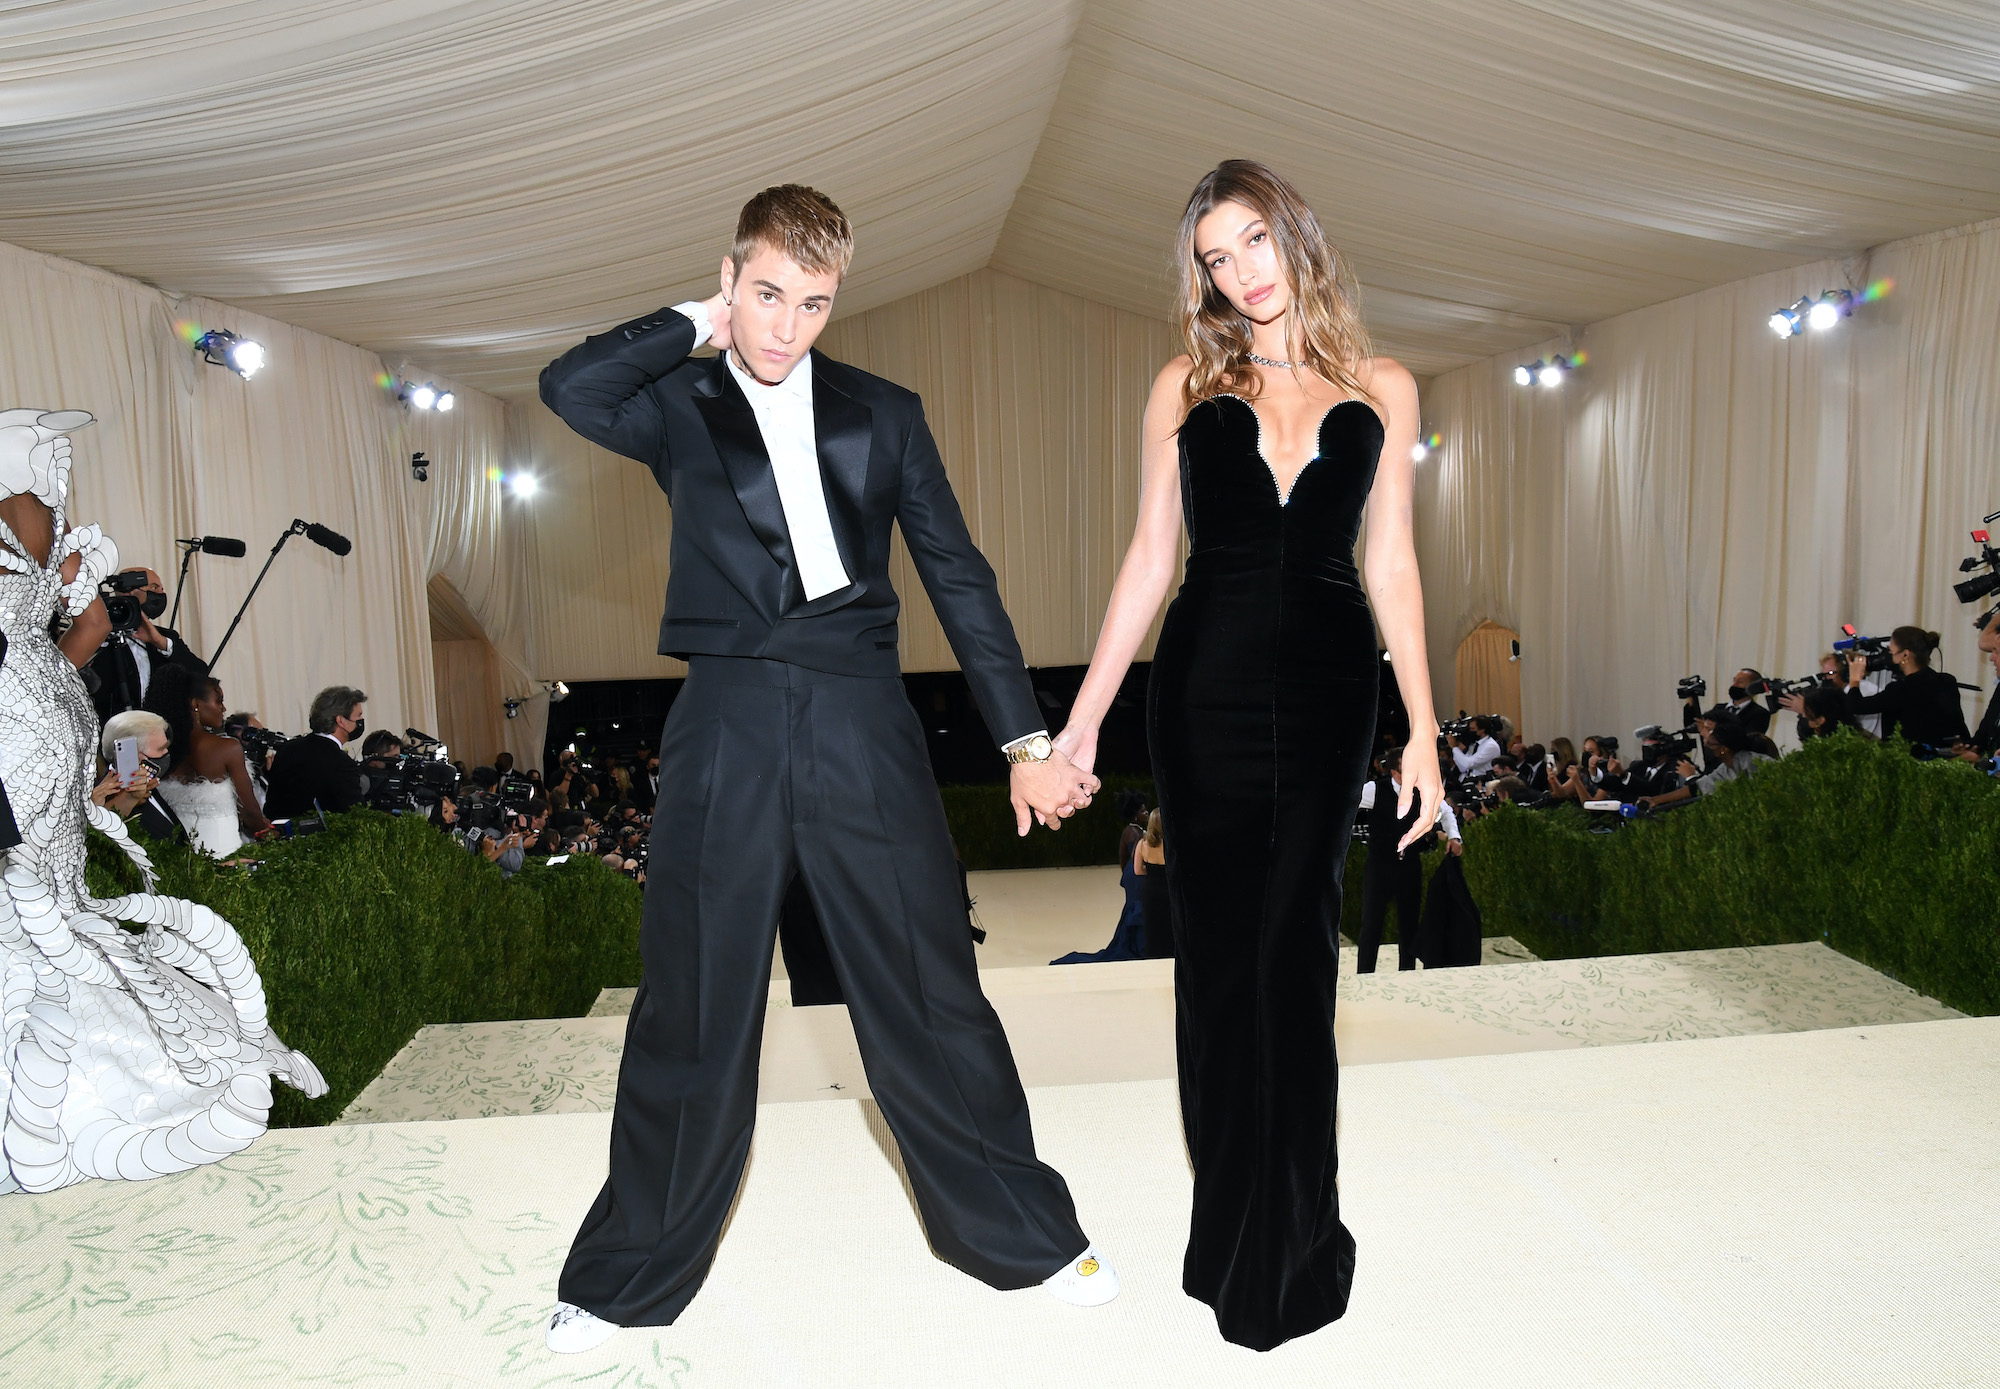 Justin and Hailey Bieber at the Met Gala in 2021